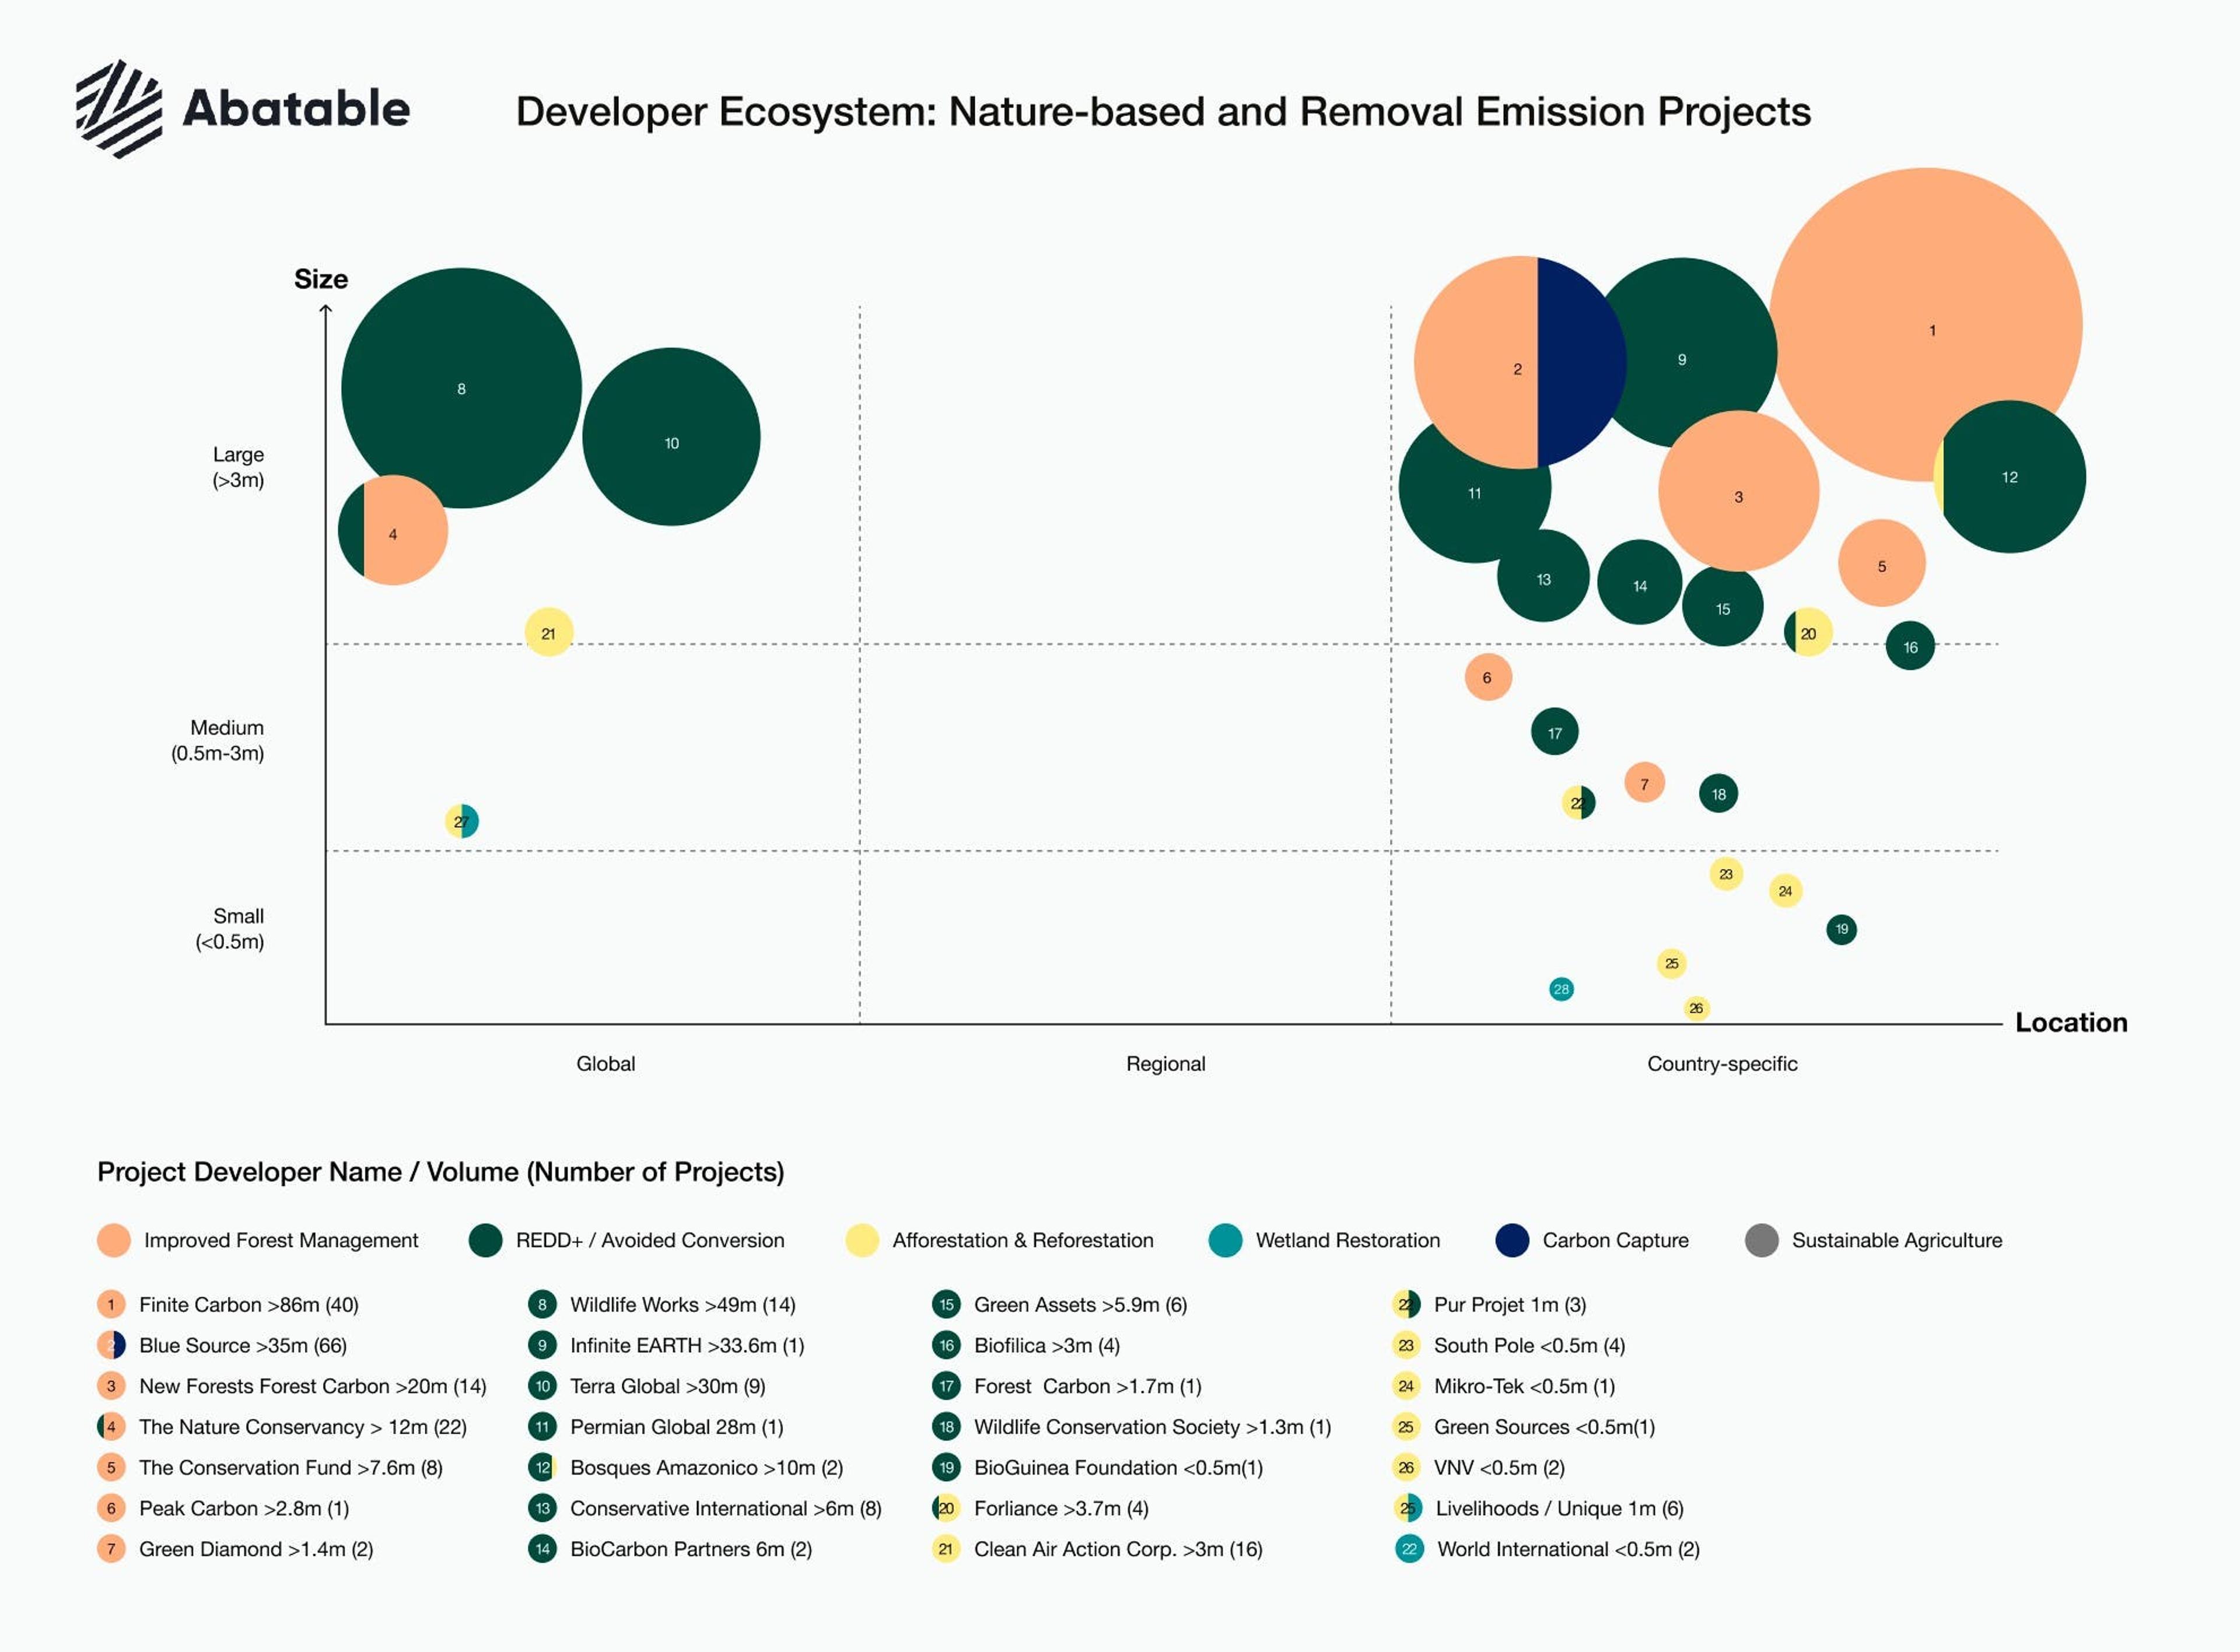 Sample of the developer ecosystem showing the concentration of nature-based country-specific projects